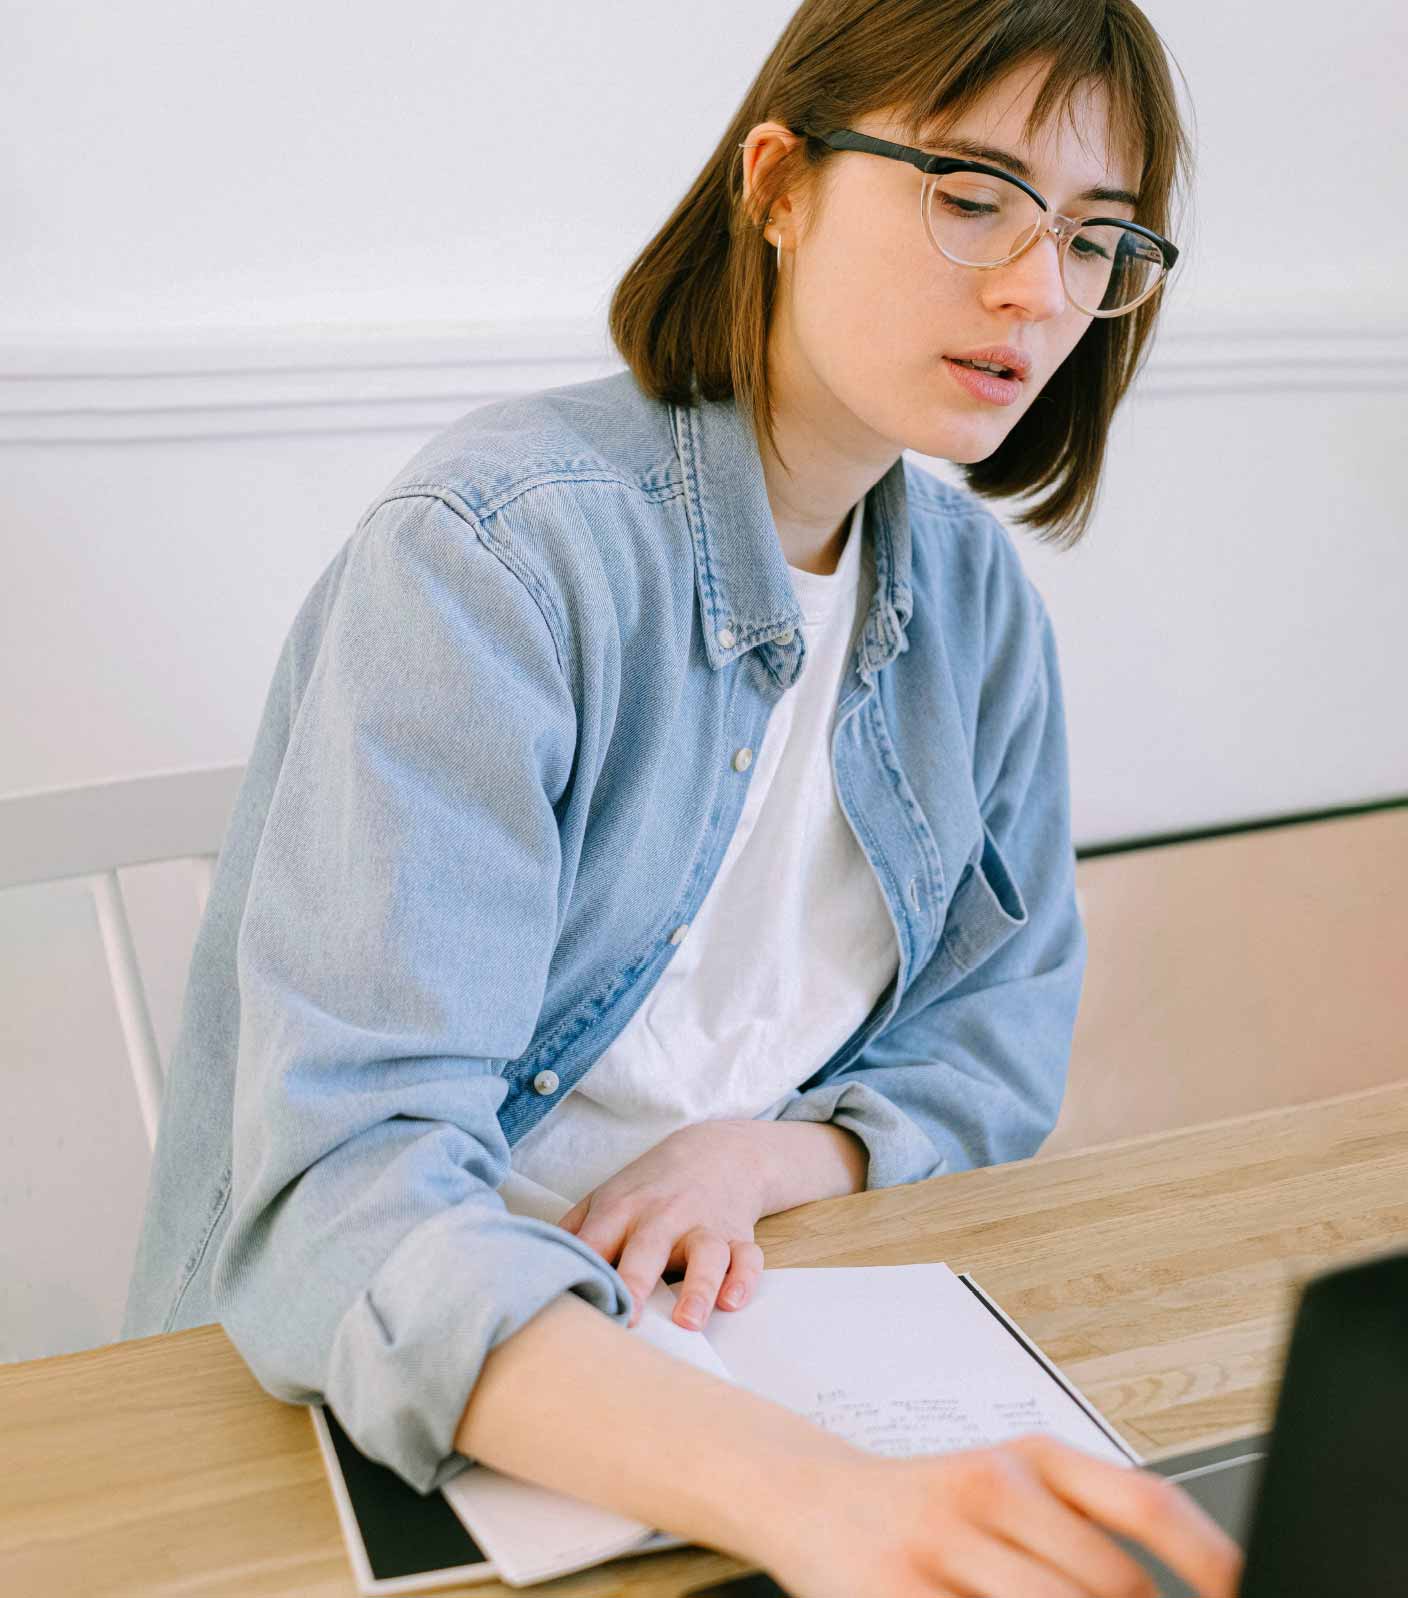 A female student with glasses sitting at a desk with a sheet of paper and a computer photographed from the front.